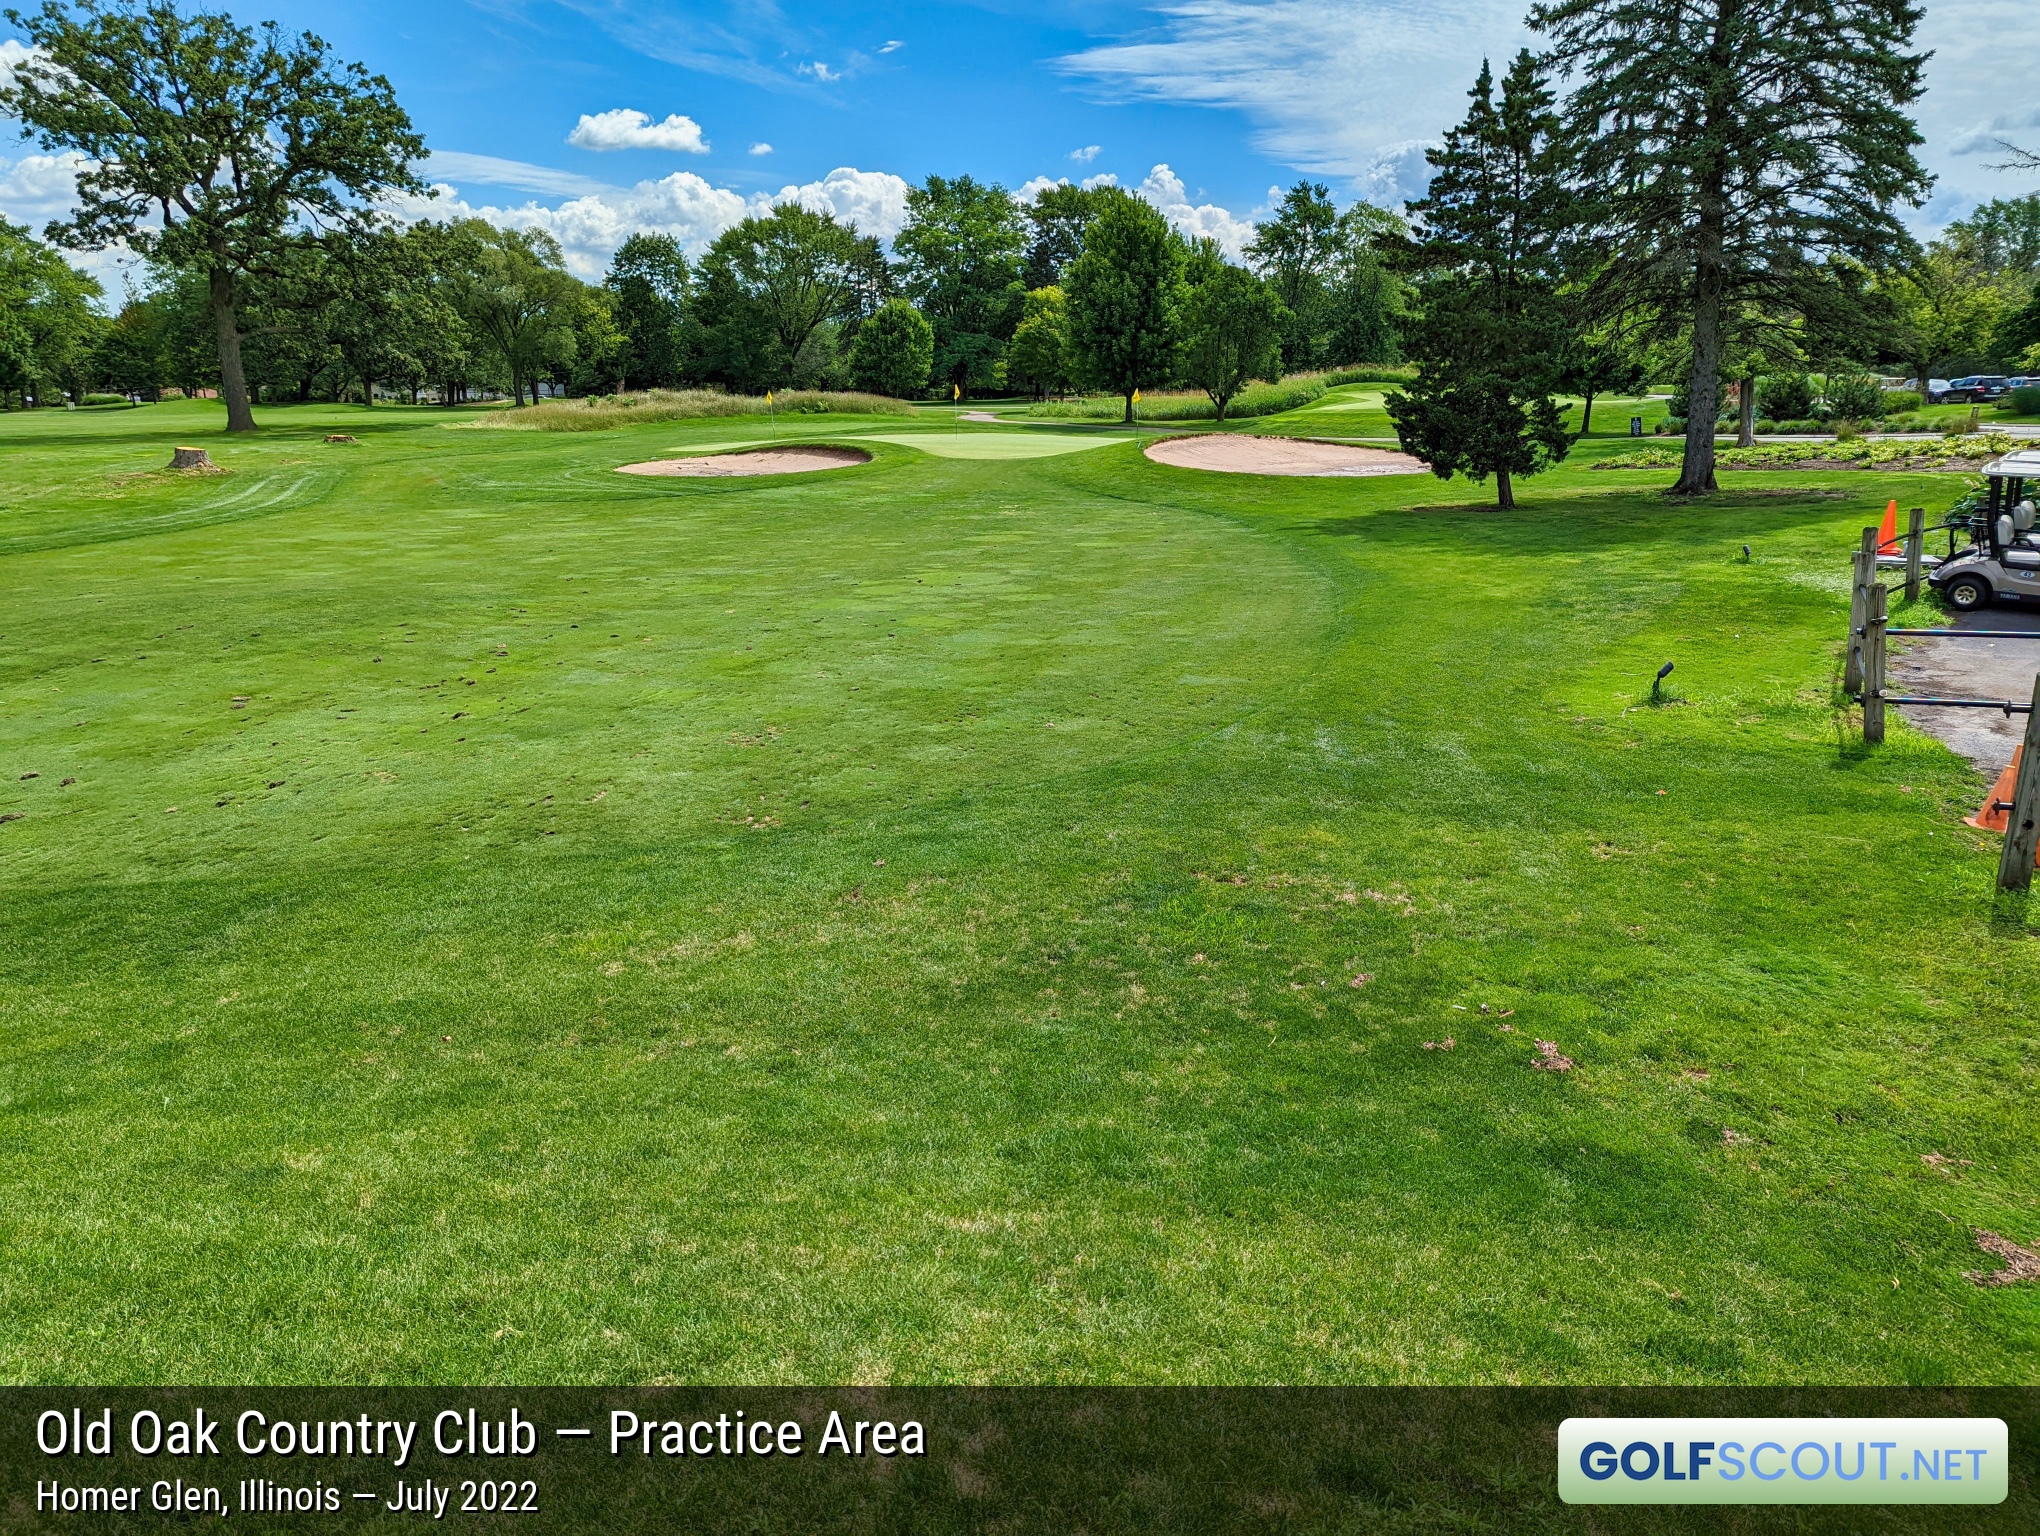 Photo of the practice area at Old Oak Country Club in Homer Glen, Illinois. 